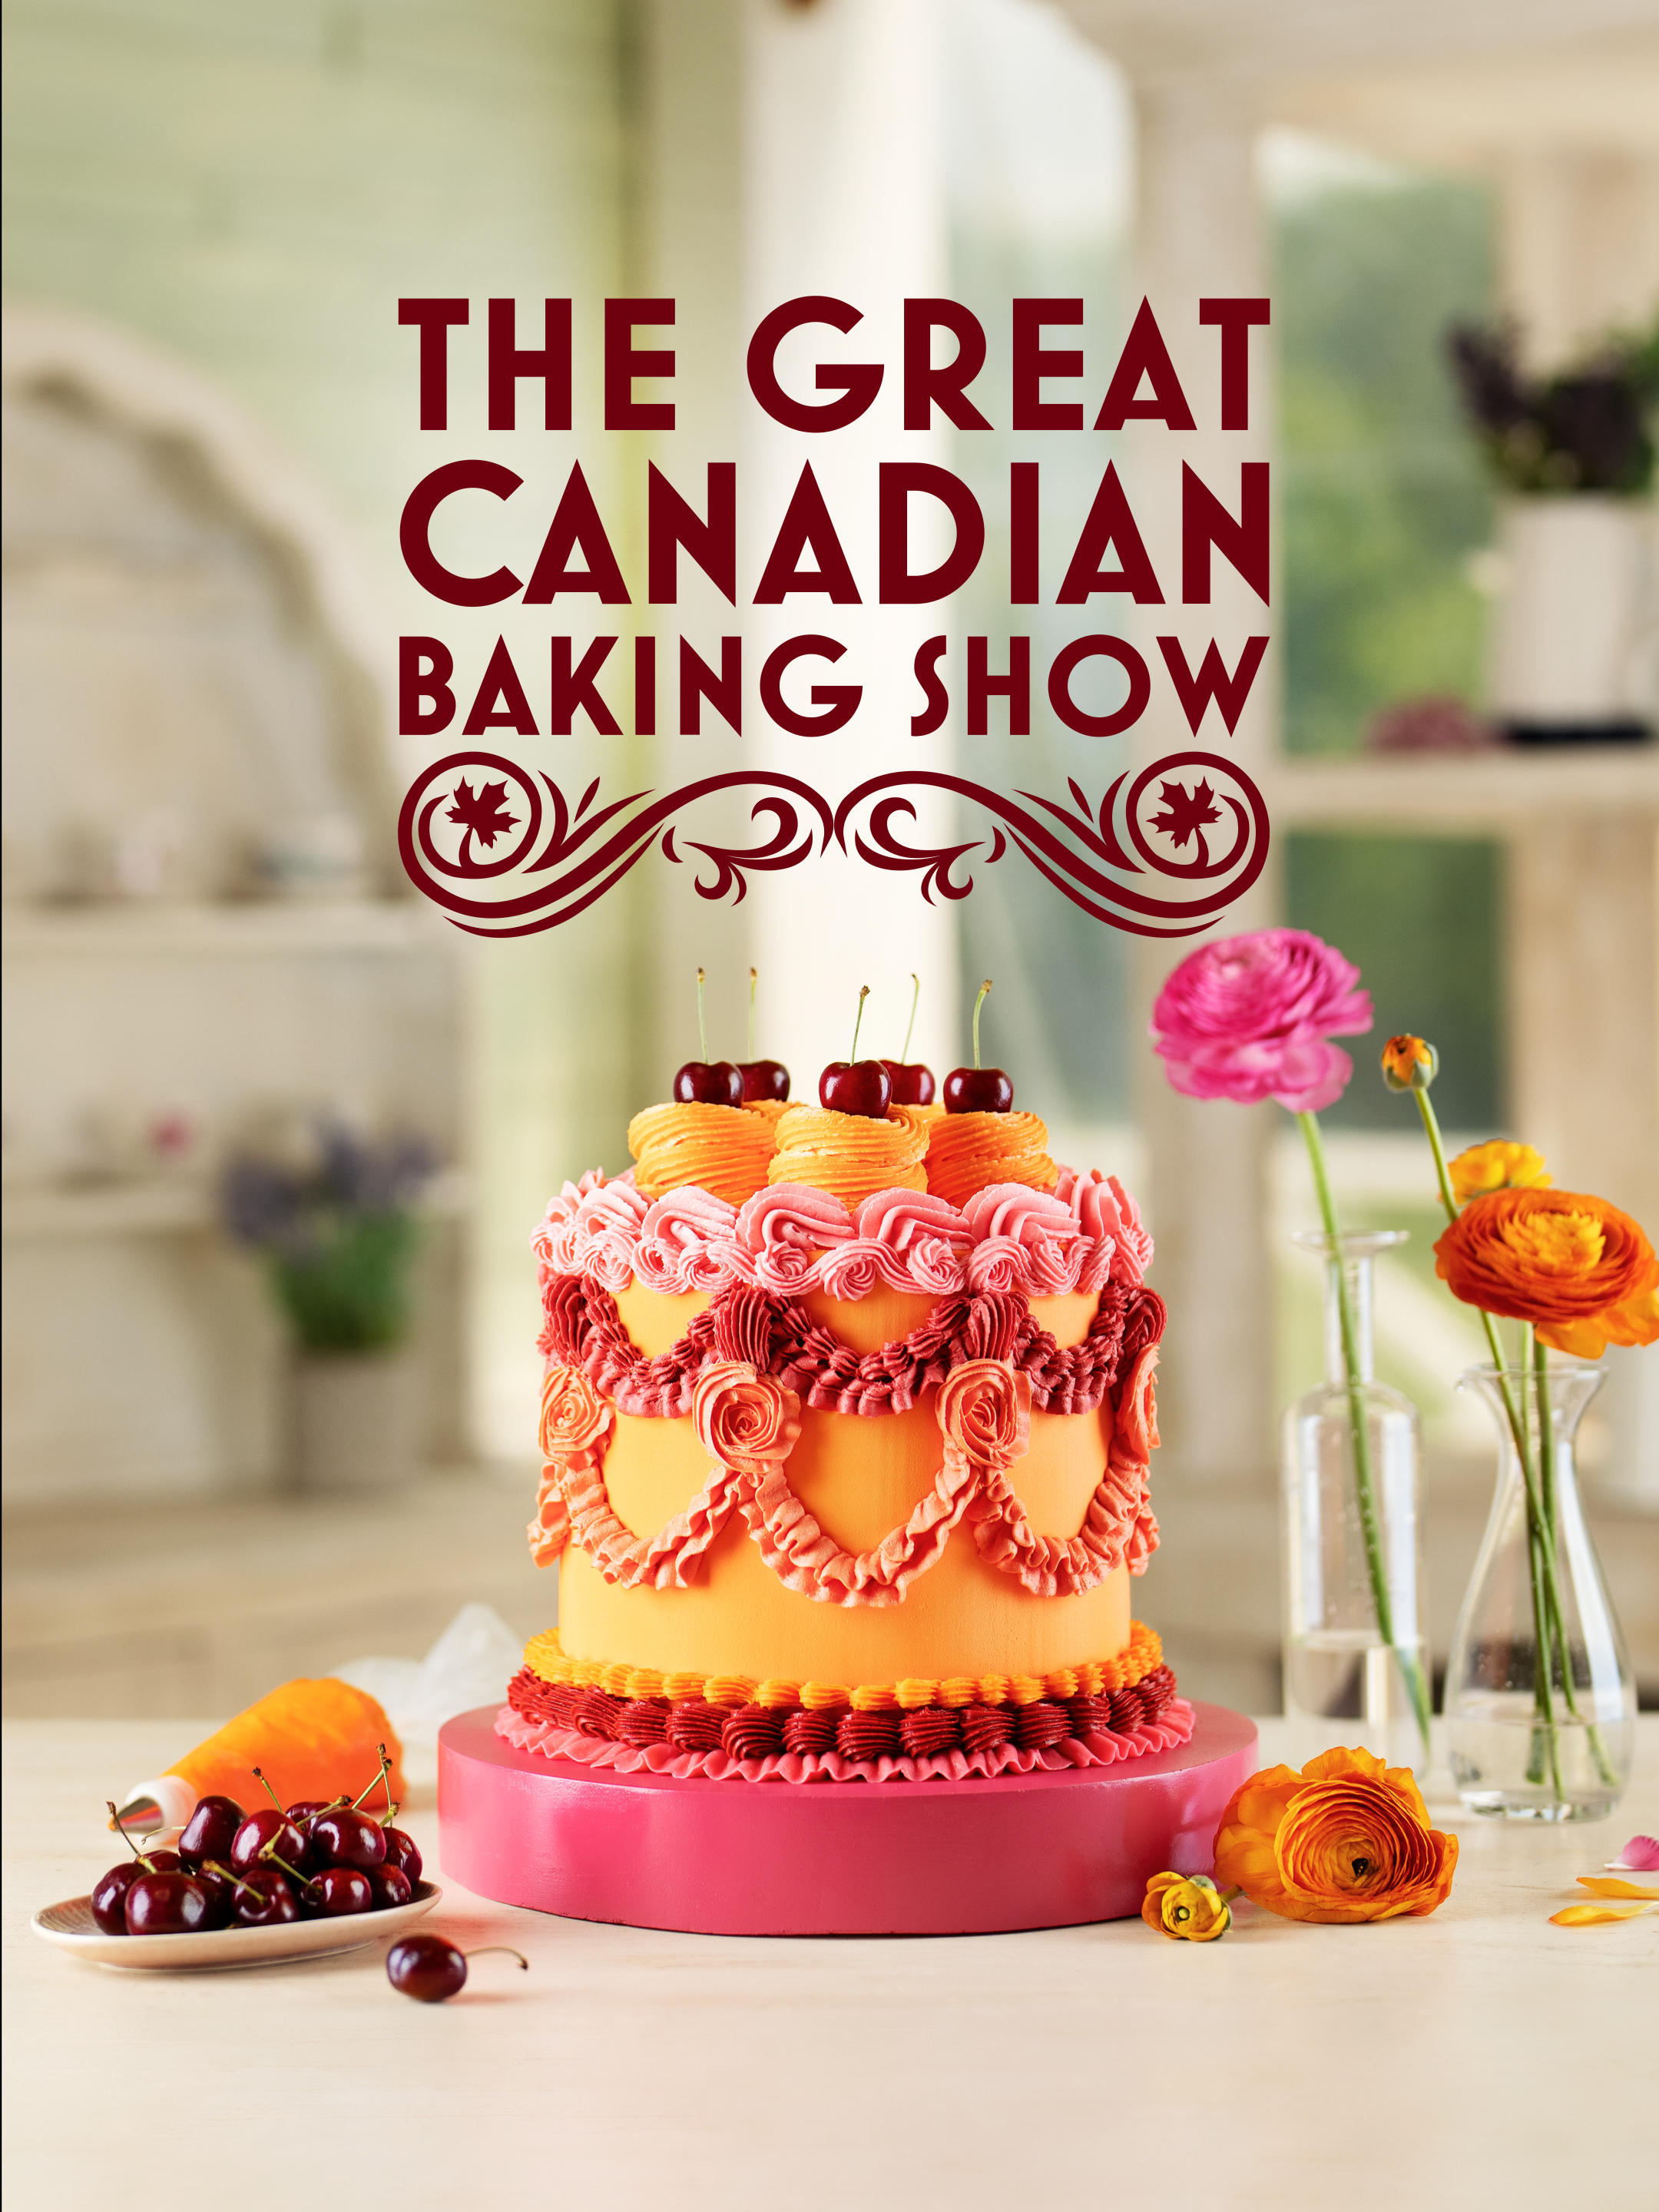 The Great Canadian Baking Show picture